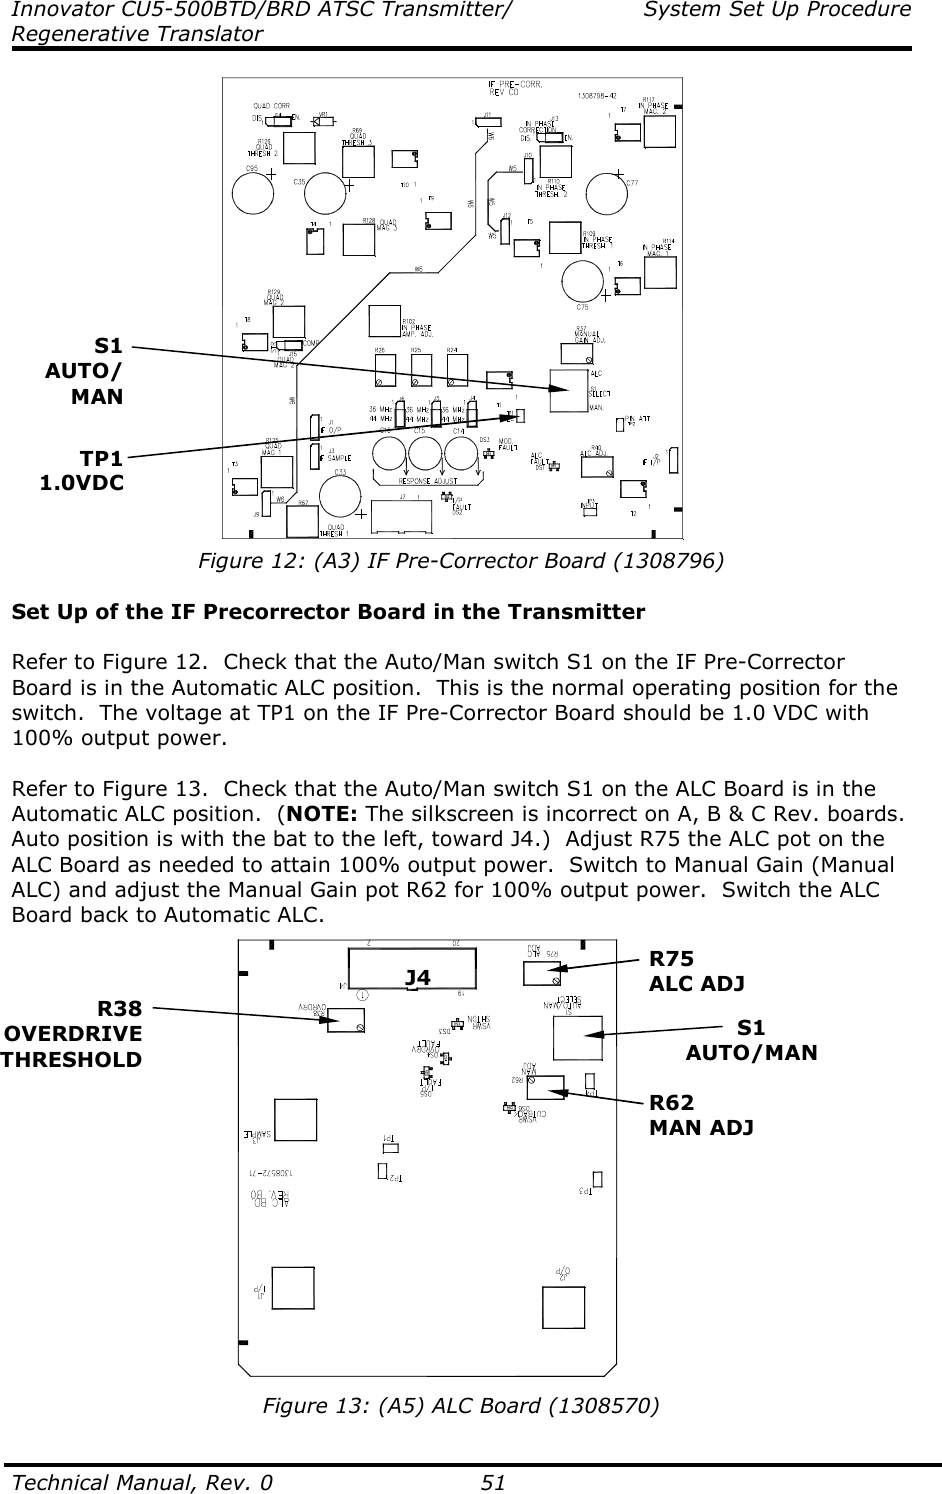 Innovator CU5-500BTD/BRD ATSC Transmitter/  System Set Up Procedure Regenerative Translator  Technical Manual, Rev. 0    51  Figure 12: (A3) IF Pre-Corrector Board (1308796)  Set Up of the IF Precorrector Board in the Transmitter  Refer to Figure 12.  Check that the Auto/Man switch S1 on the IF Pre-Corrector Board is in the Automatic ALC position.  This is the normal operating position for the switch.  The voltage at TP1 on the IF Pre-Corrector Board should be 1.0 VDC with 100% output power.  Refer to Figure 13.  Check that the Auto/Man switch S1 on the ALC Board is in the Automatic ALC position.  (NOTE: The silkscreen is incorrect on A, B &amp; C Rev. boards.  Auto position is with the bat to the left, toward J4.)  Adjust R75 the ALC pot on the ALC Board as needed to attain 100% output power.  Switch to Manual Gain (Manual ALC) and adjust the Manual Gain pot R62 for 100% output power.  Switch the ALC Board back to Automatic ALC.   Figure 13: (A5) ALC Board (1308570) S1 AUTO/ MAN S1 AUTO/MAN TP1 1.0VDC J4 R75 ALC ADJ R62 MAN ADJ R38 OVERDRIVE THRESHOLD 